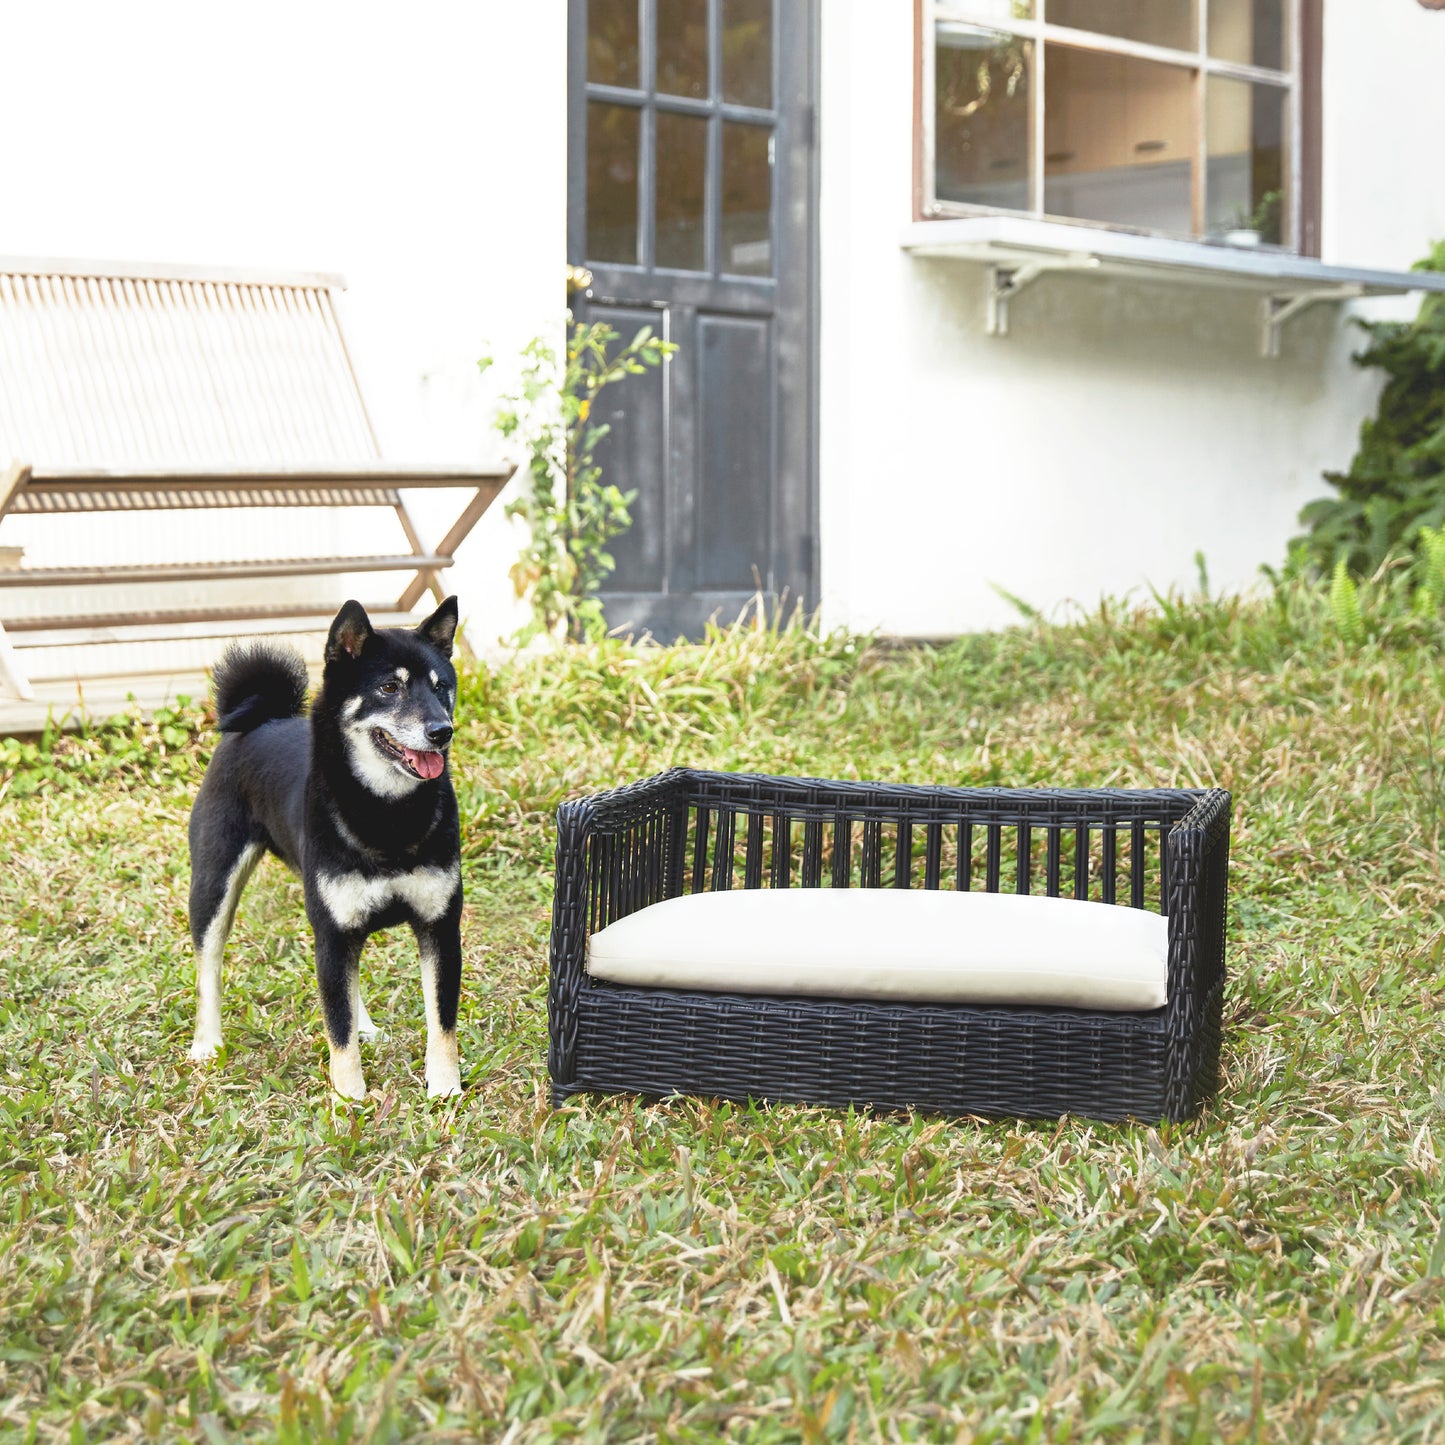 The Comfy Pets Rattan Woven Dog or Cat Bed & Cushion